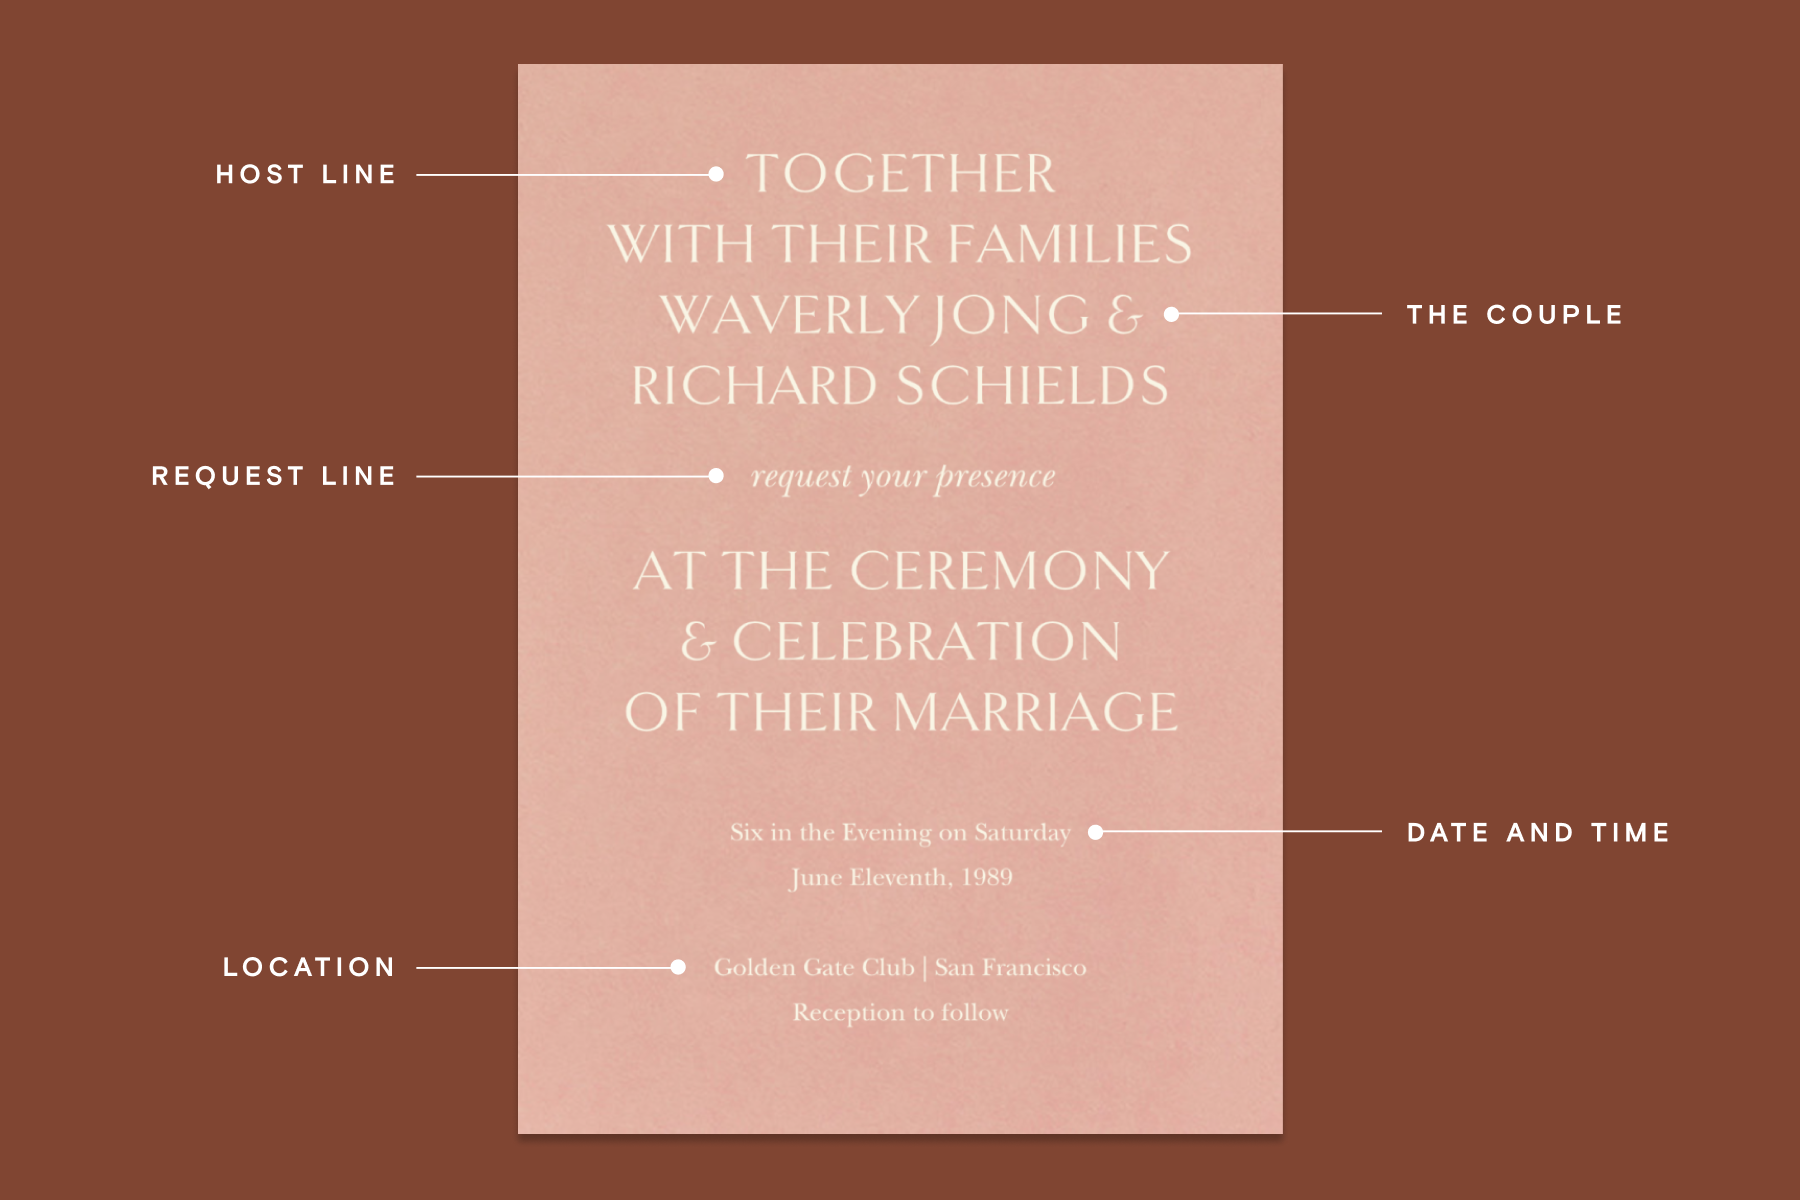 A pink typographic wedding invitation with instructions on how to format along the sides, including the host line, the couple, request line, date and time, and the venue.